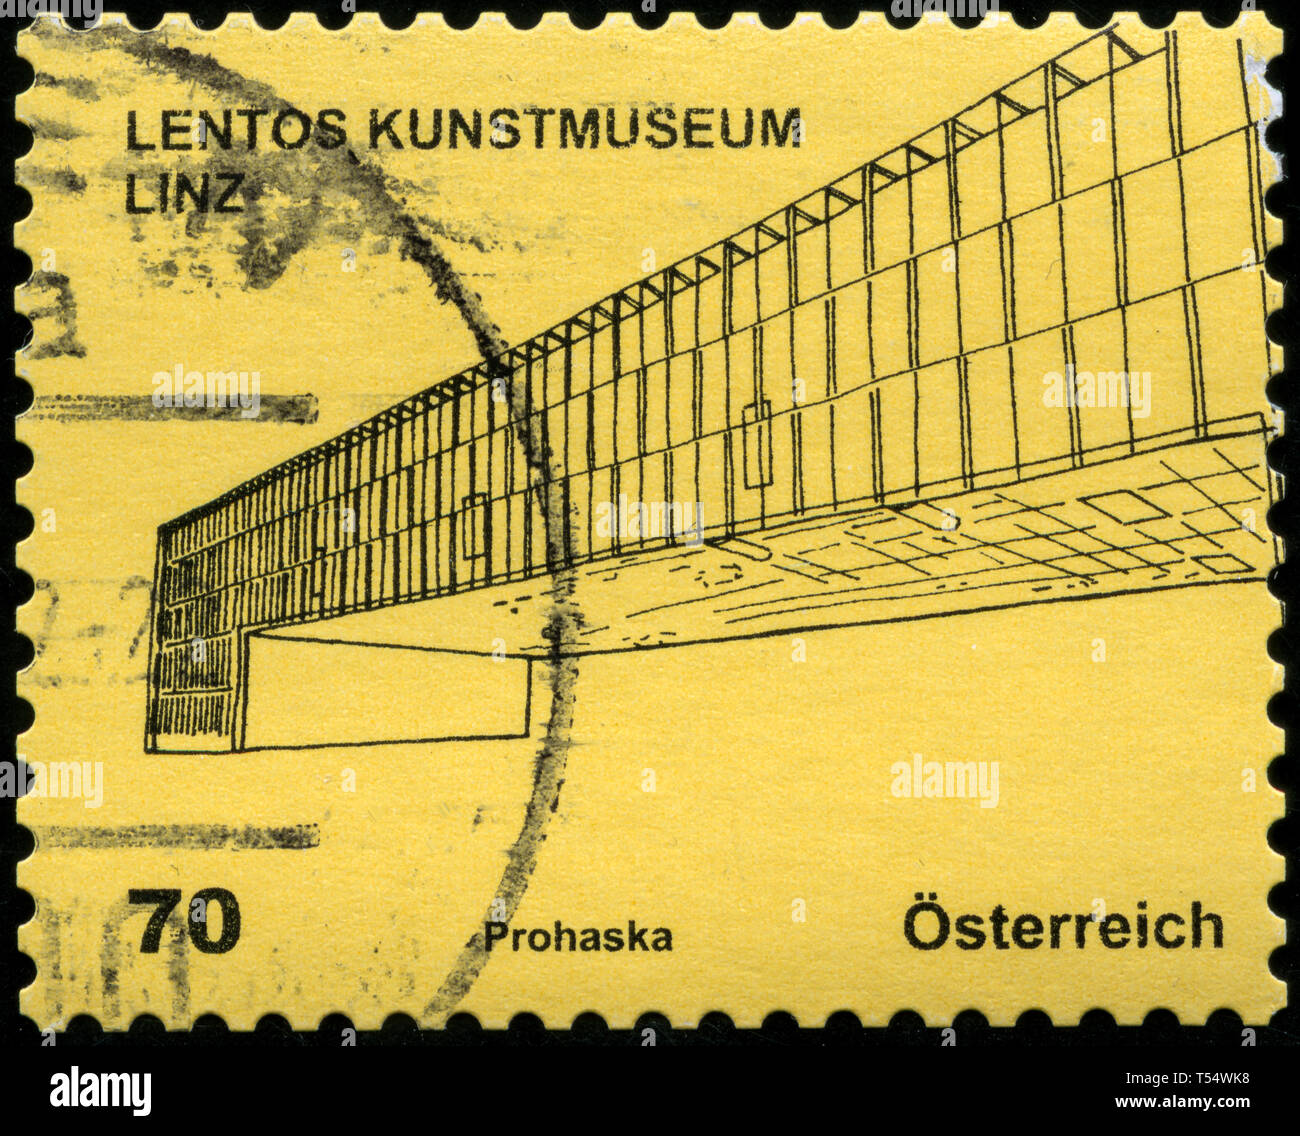 Postage stamp from Austria in the Modern Architecture series issued in 2011 Stock Photo